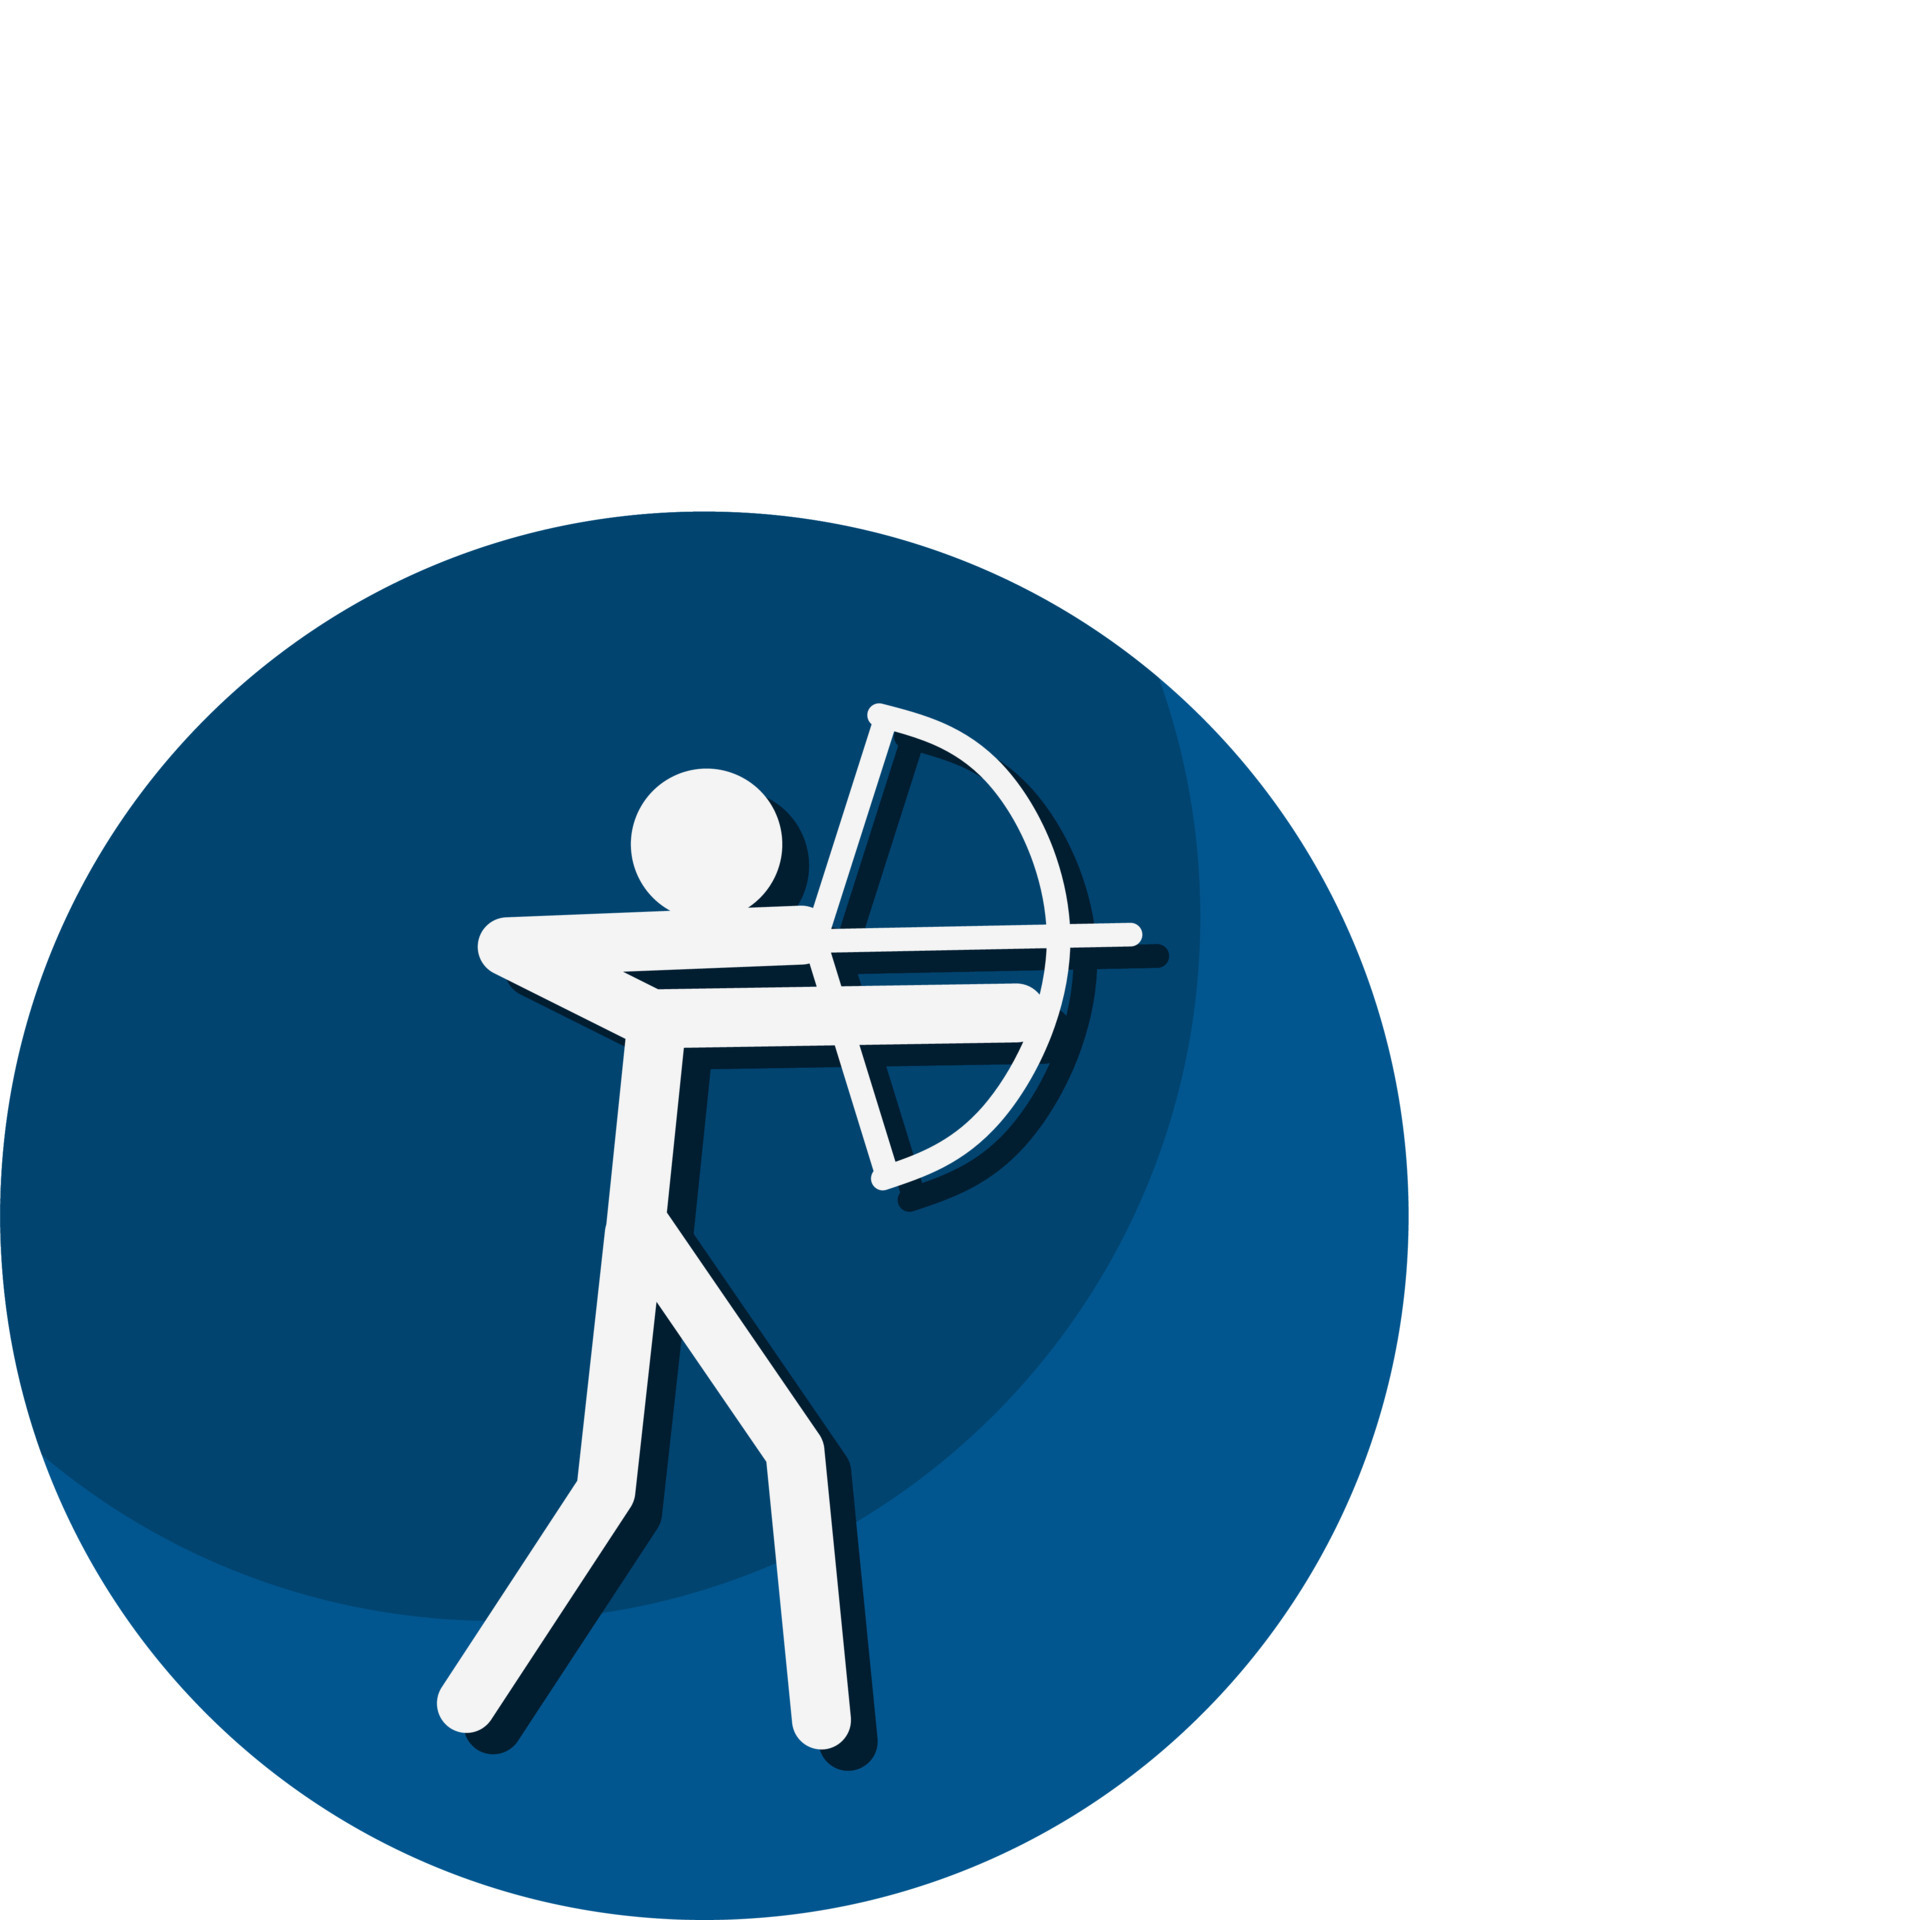 Sports archery icon. A symbol dedicated to sports and games